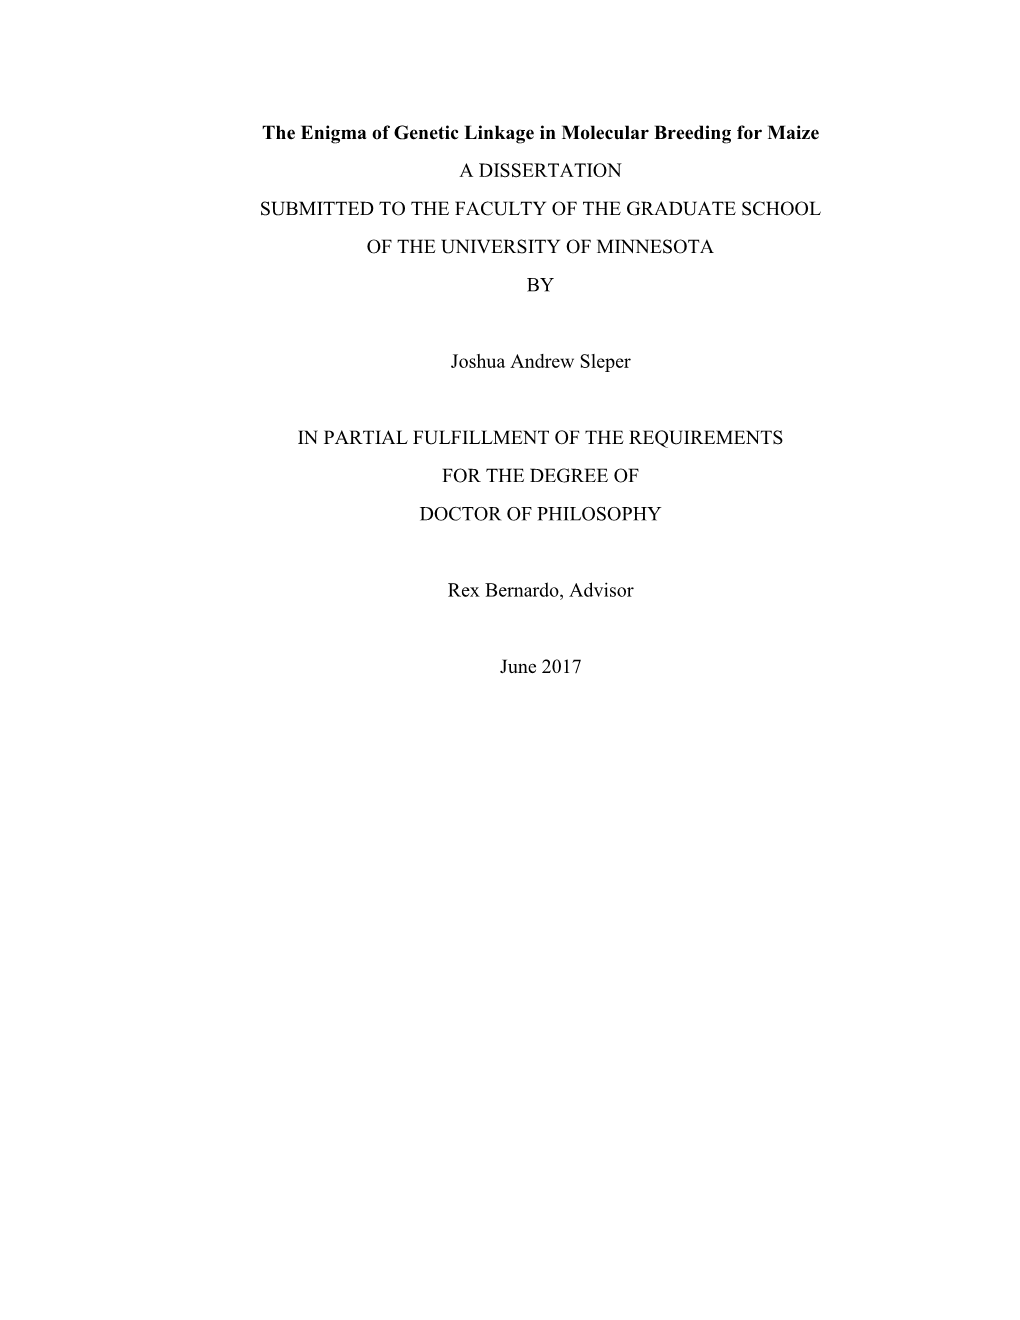 The Enigma of Genetic Linkage in Molecular Breeding for Maize a DISSERTATION SUBMITTED to the FACULTY of the GRADUATE SCHOOL of the UNIVERSITY of MINNESOTA BY